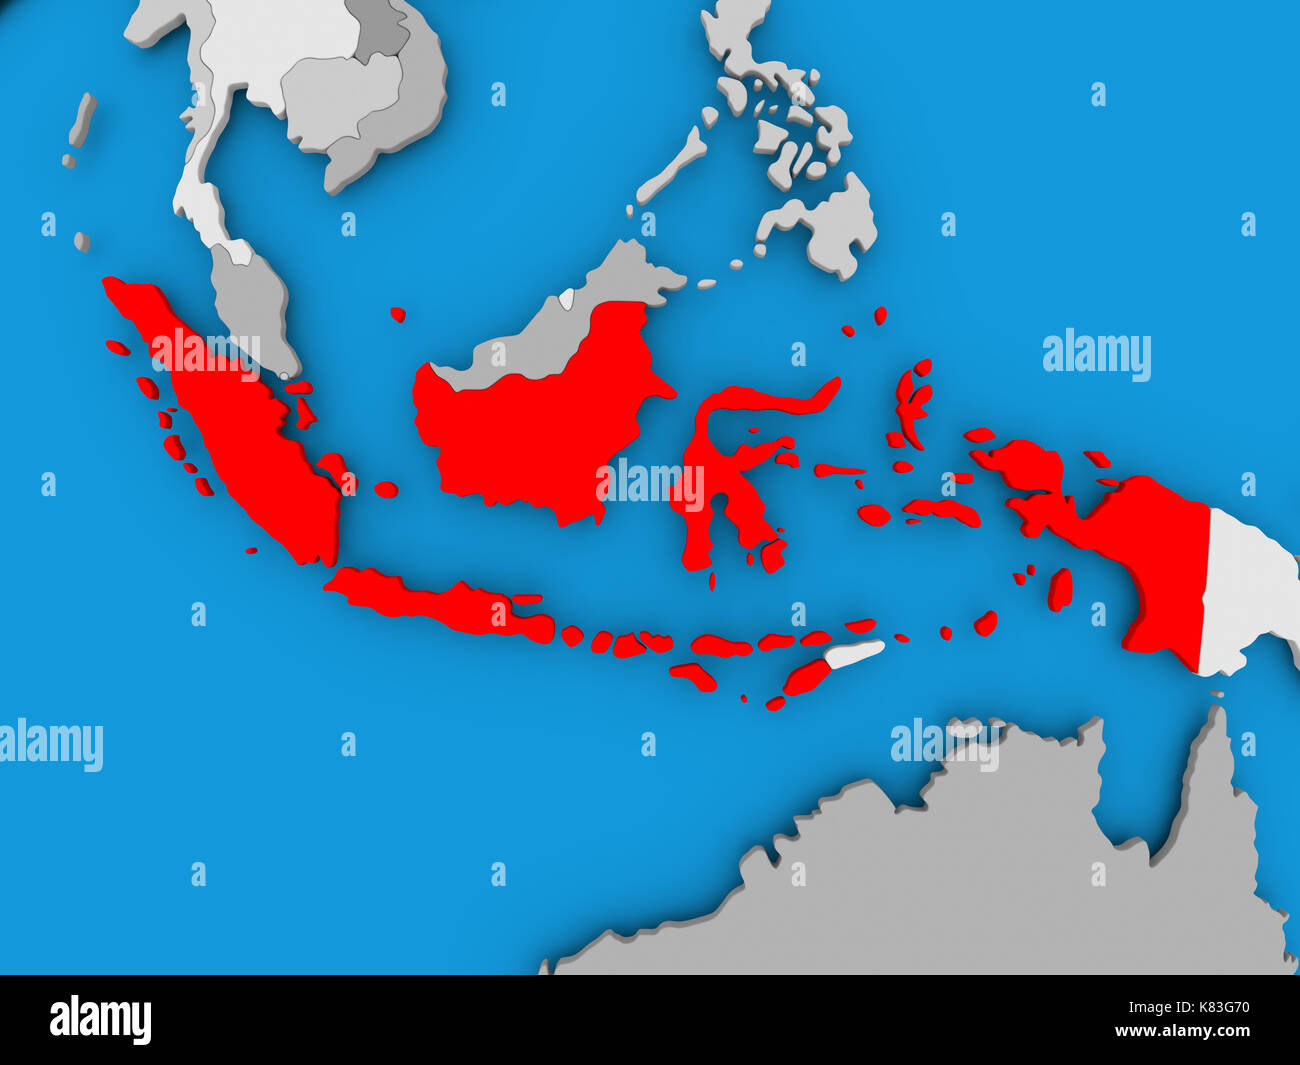 Indonesia in red on political map. 3D illustration. Stock Photo